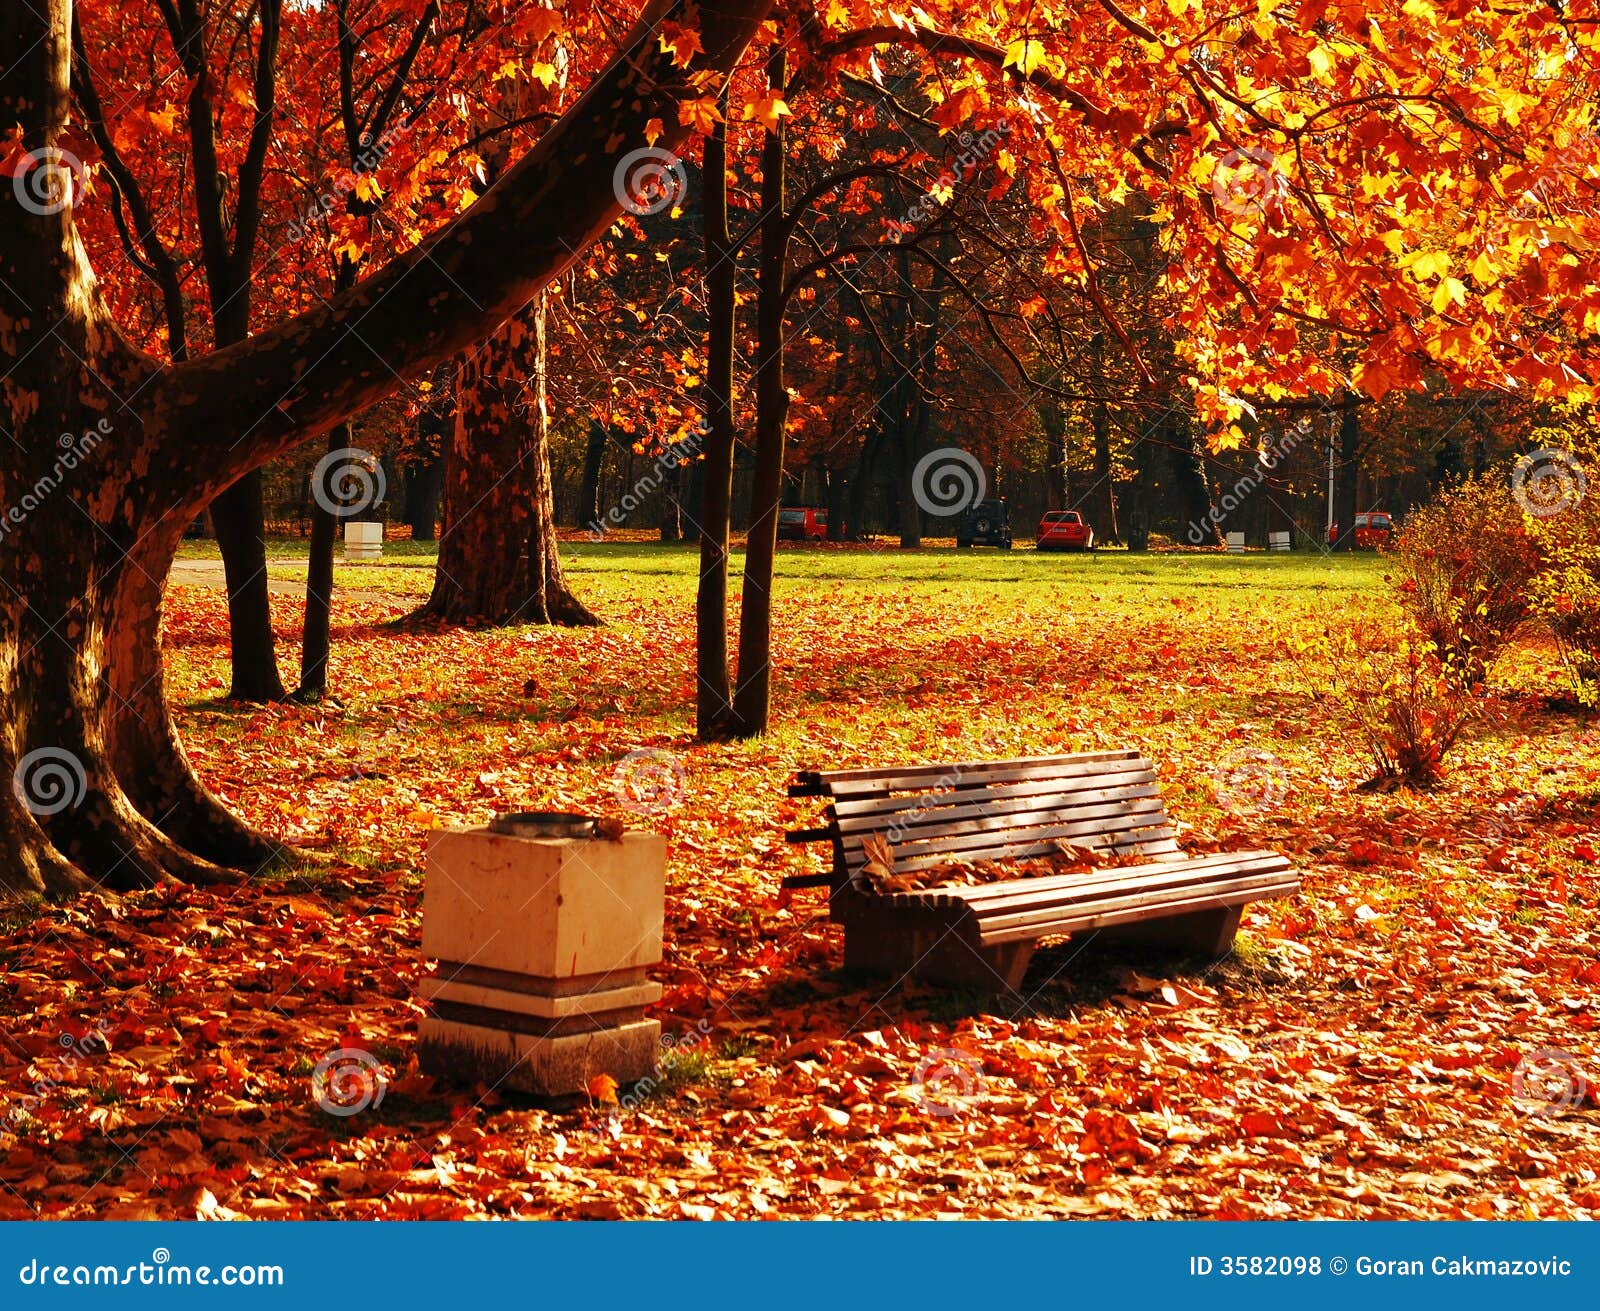 Park in November stock photo. Image of peaceful, october - 3582098